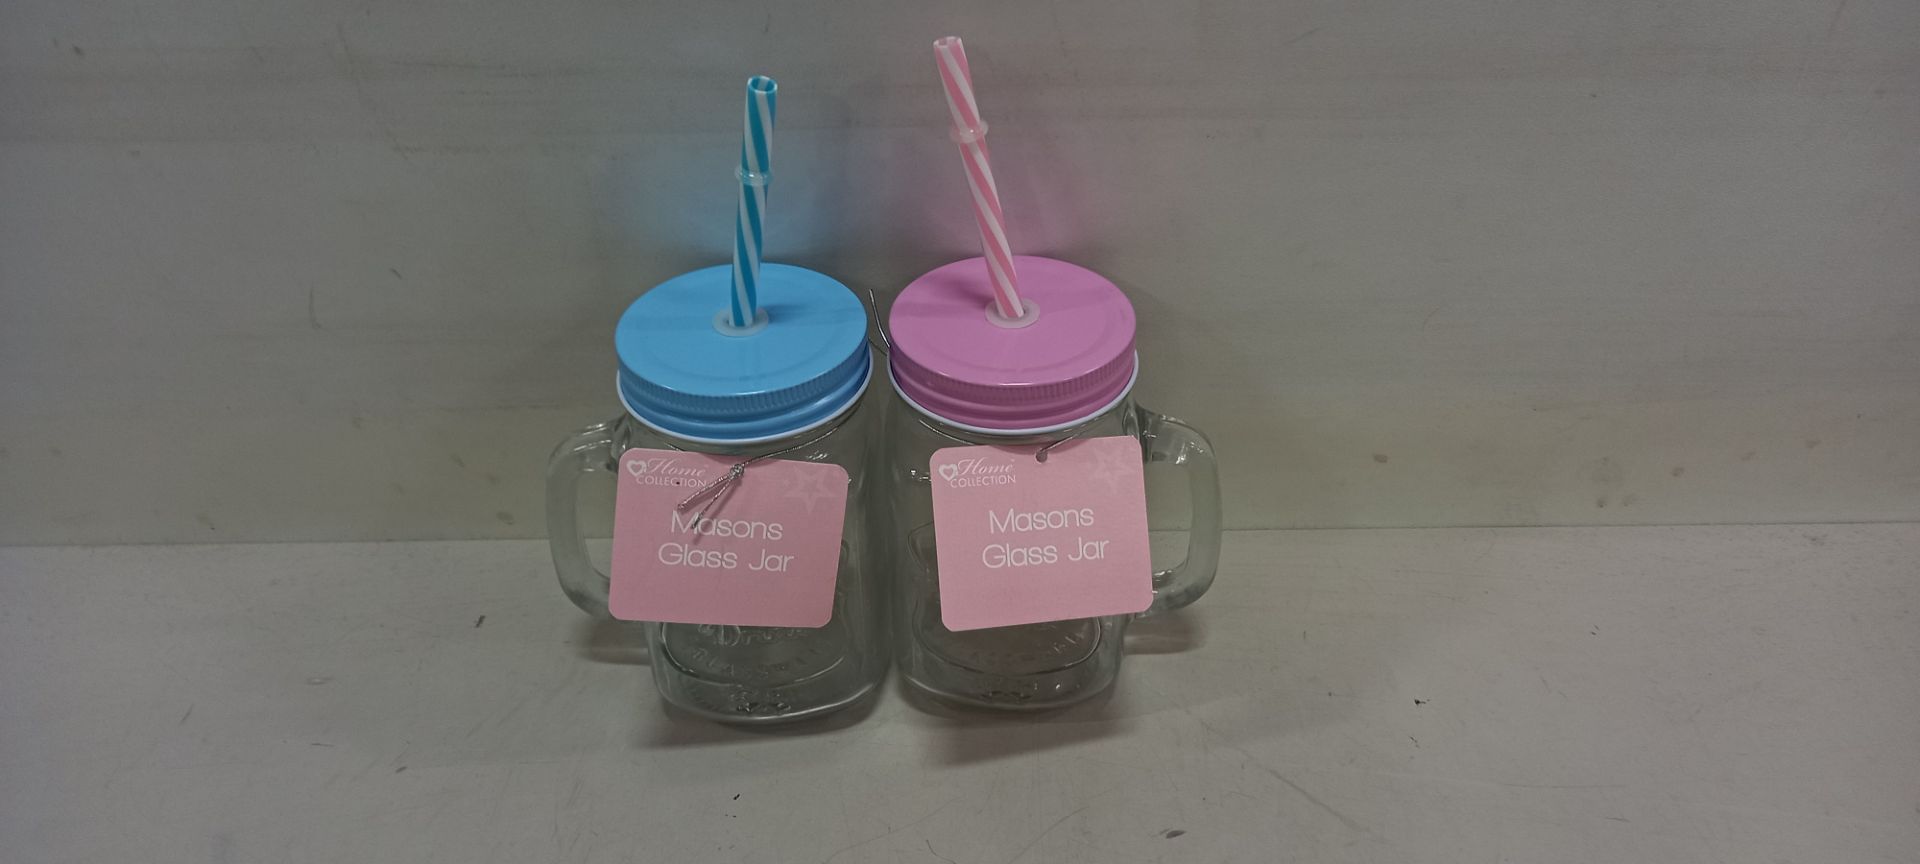 108 X BRAND NEW MASON GLASS JARS WITH STRAWS ( IN BLUE AND PINK ( PLASTIC STRAWS ) IN 9 BOXES